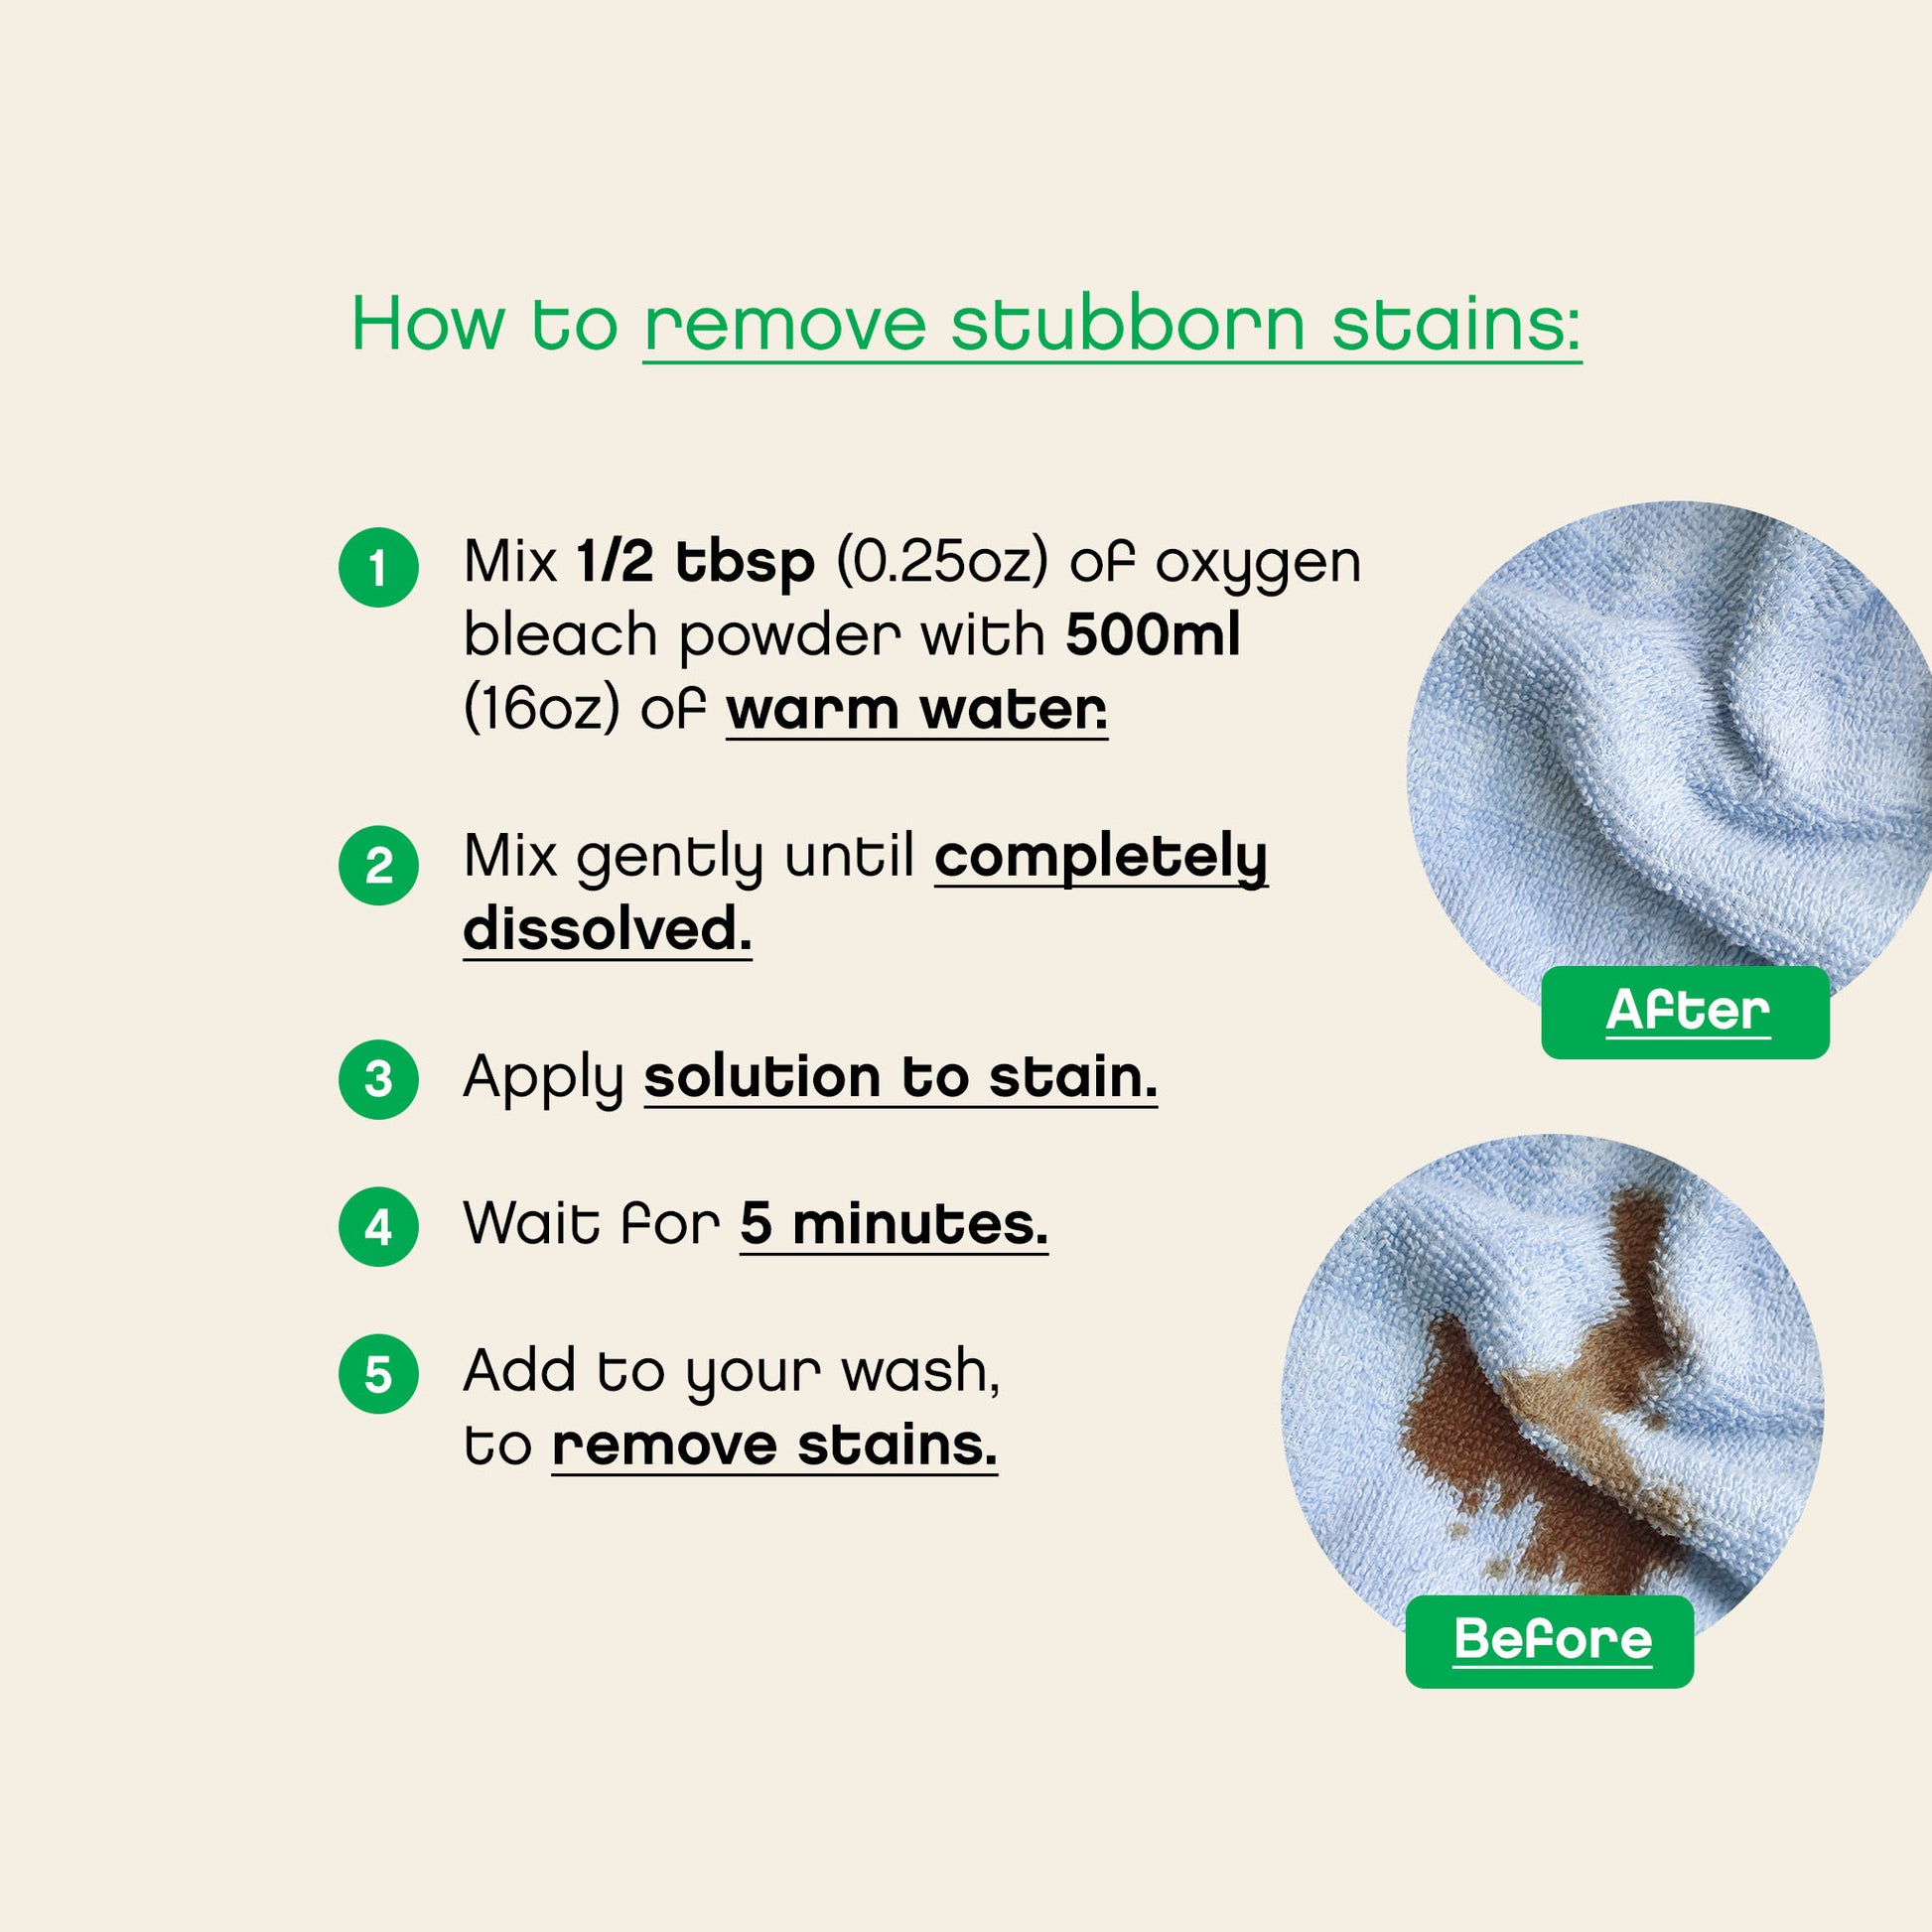 Best Natural Stain Remover, Oxygen Bleach Powder, EWG Verified, How to remove stubborn stains